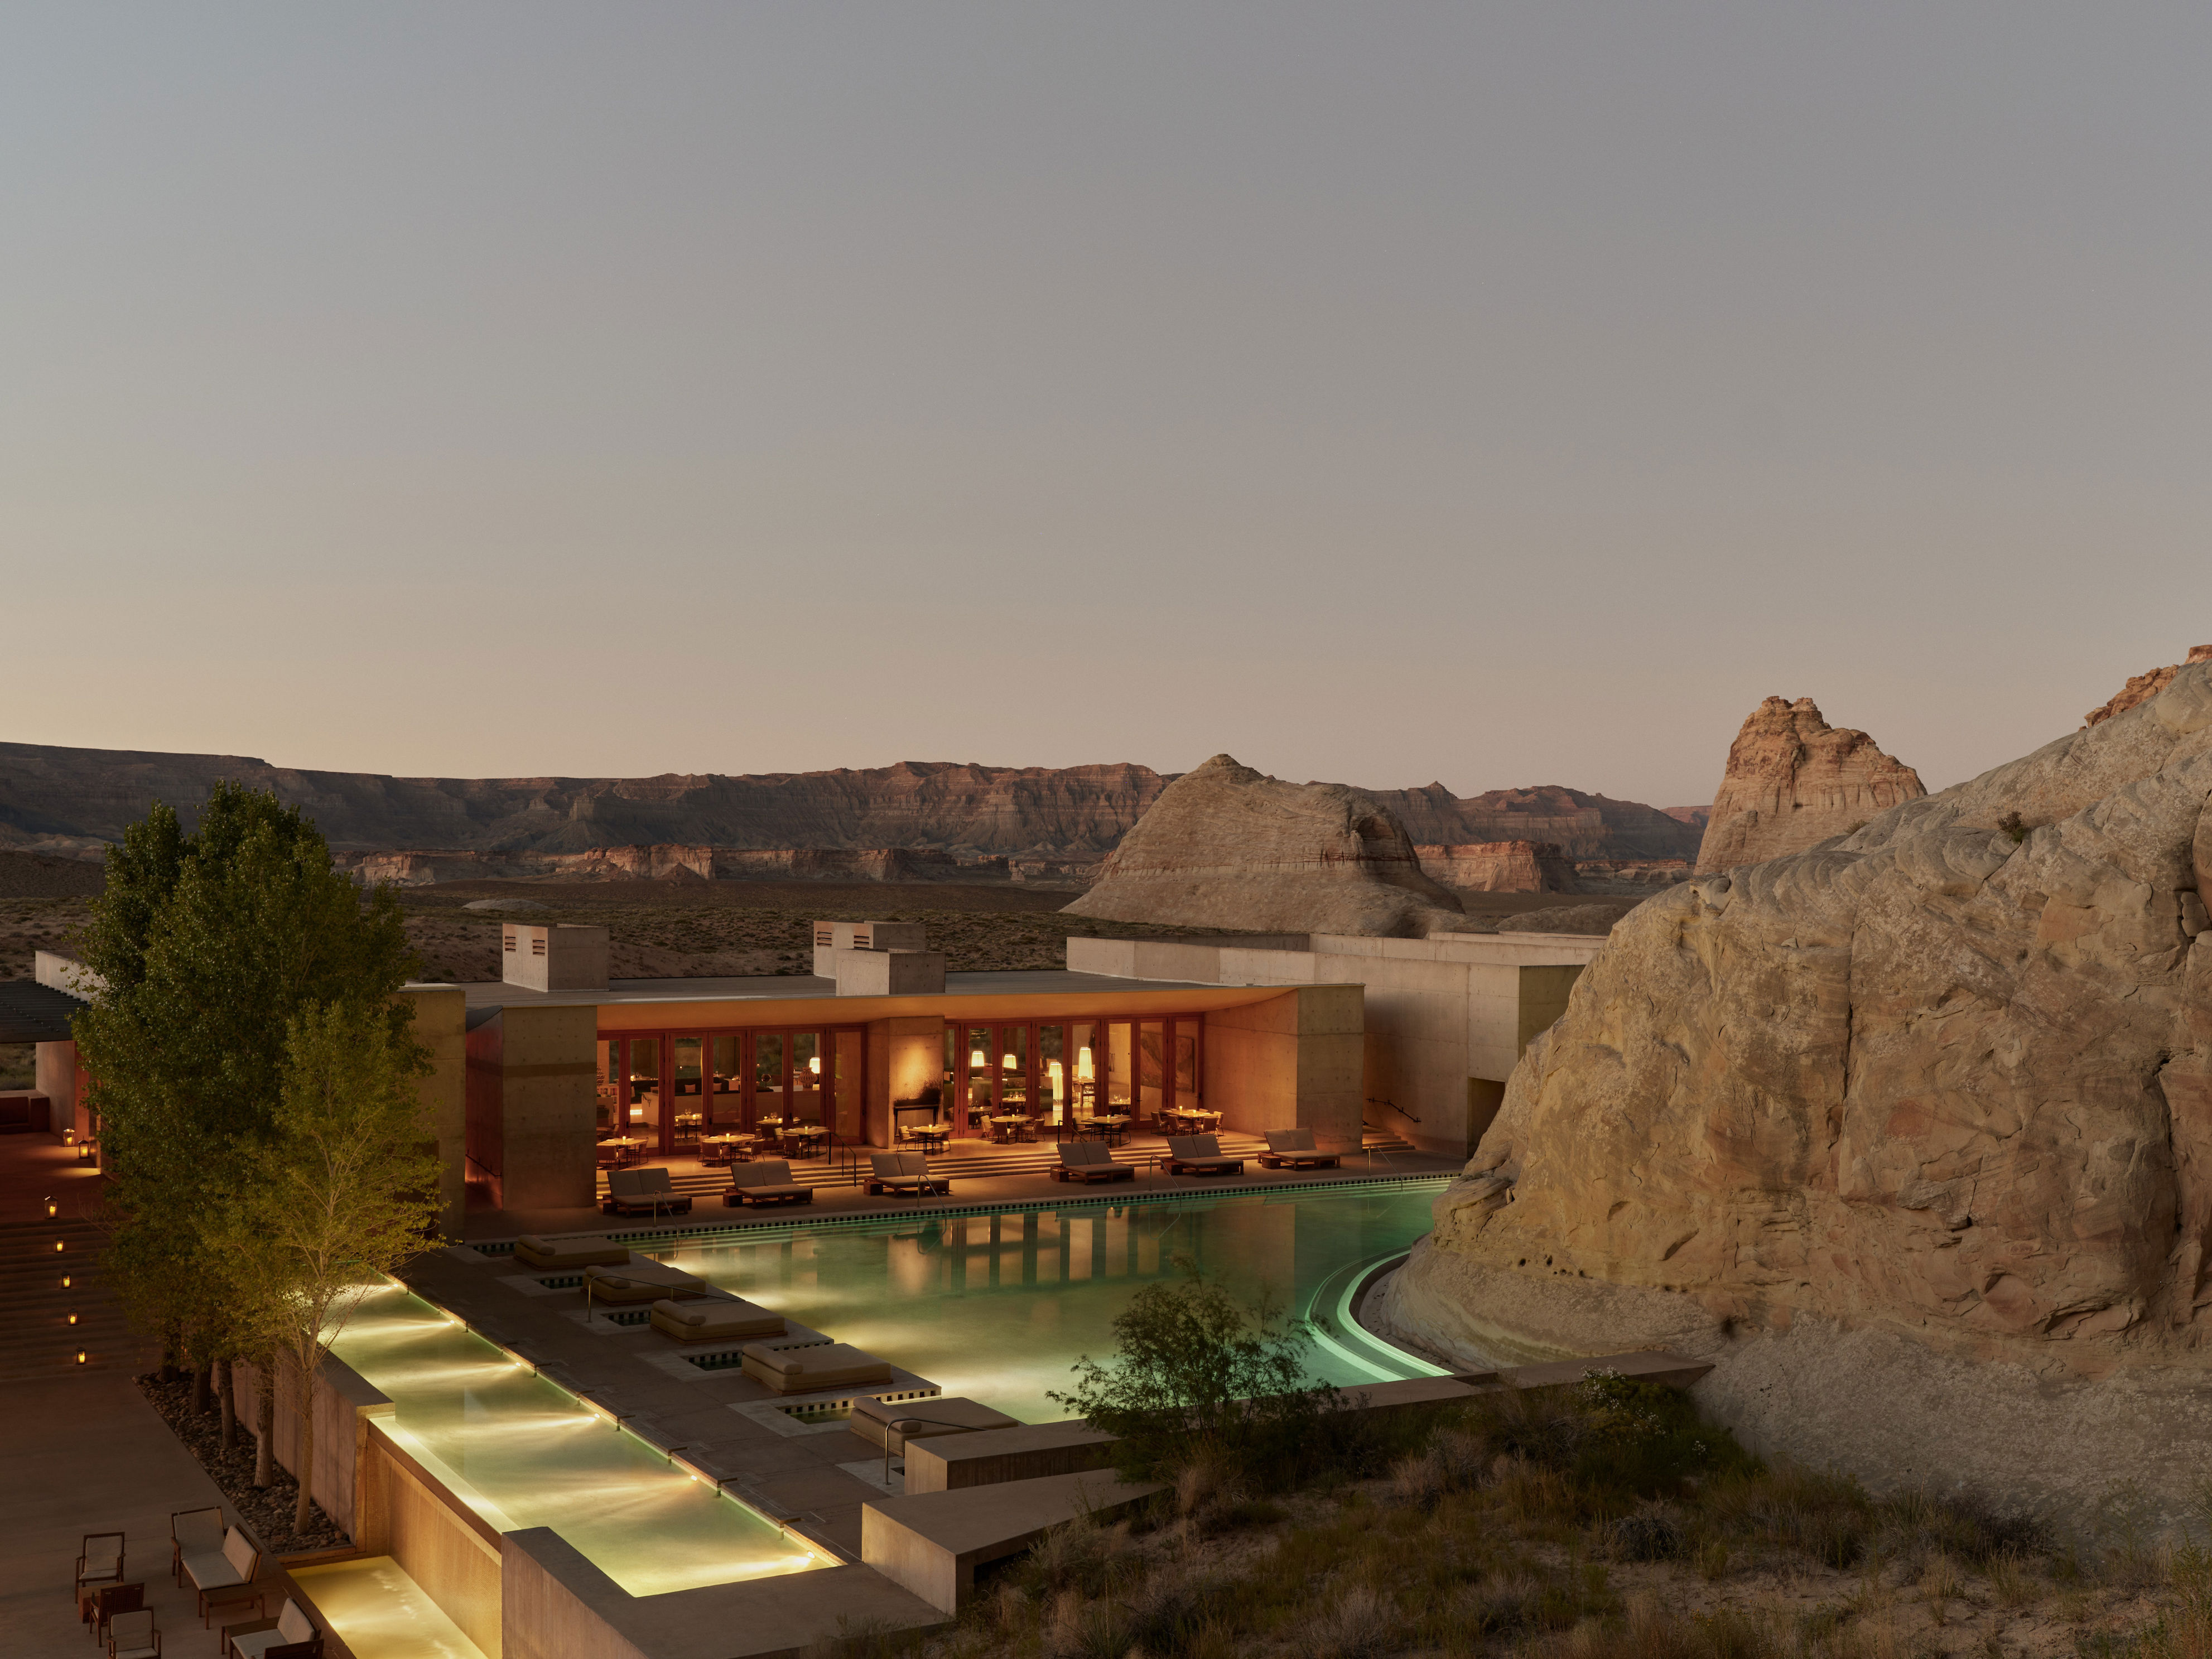 <p>This postcard-ready <a href="https://www.aman.com/resorts/amangiri?adgroup_name=Amangiri_-_Amangiri_Resort&utm_campaign=LUUX_G_AMANGIRI_US_NAM_ENG_BRAND_5.3.23&keyword=amangiri%20resort&utm_term=amangiri%20resort&utm_medium=cpc&utm_source=google&utm_content=Amangiri_-_Amangiri_Resort&gad_source=1&gclid=CjwKCAiAivGuBhBEEiwAWiFmYV1SwXnGGcqu21F5k654XJjbqUz0r-hQawl6pr5Xs2Ijg4kUTkvNHxoC0hIQAvD_BwE">resort</a> might appear as a mirage among miles of arid Utah desert, but the wellness sanctuary by architects Marwan Al-Sayed, Wendell Burnette, and Rick Joy is a true-blue oasis built right into the surrounding Navajo sandstone. The 25,000-square-foot spa’s design echoes and emphasizes its stunning natural landscape with an earthy, sun-baked color palette, ample use of natural materials, calm reflecting pools, and skylights throughout. Typical spa amenities like a sauna, steam room, and cold plunge are available to visitors alongside more unique offerings, like <a href="https://www.architecturaldigest.com/gallery/fire-pit-ideas?mbid=synd_msn_rss&utm_source=msn&utm_medium=syndication">fire pit</a> aromatherapy, dark exposure sessions, and an “Open Sky Sound Journey,” which includes a hike to a nearby natural amphitheater for a sound bowl ceremony.</p> <div class="callout"><p><a href="https://www.aman.com/resorts/amangiri" title="Book now at Aman.com">Book now at Aman.com</a></p> </div><p>Sign up for our newsletter to get the latest in design, decorating, celebrity style, shopping, and more.</p><a href="https://www.architecturaldigest.com/newsletter/subscribe?sourceCode=msnsend">Sign Up Now</a>